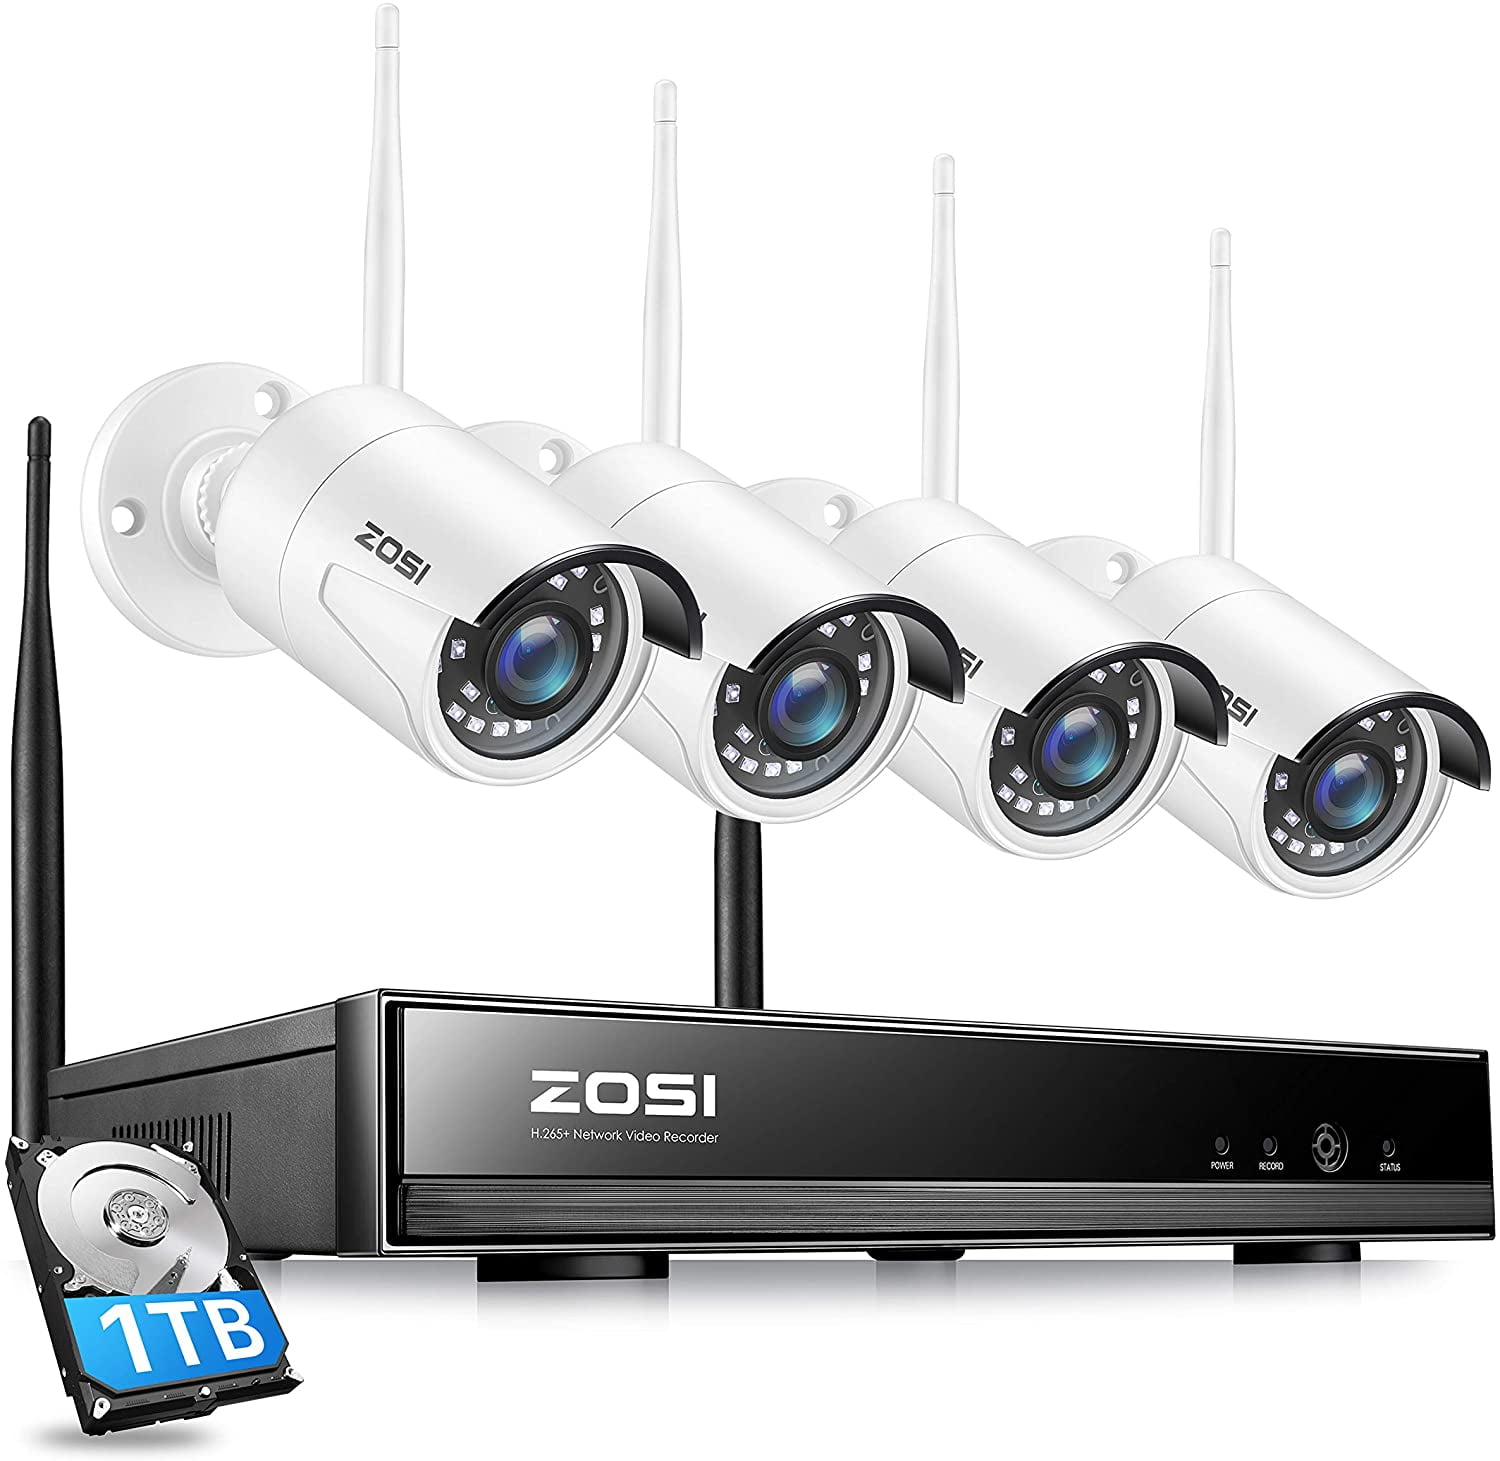 ZOSI 1080P 8CH Security Cameras System with 1TB Hard Drive Video Recorder DVR with 5 Security Cameras for Outdoor Indoor H.265 